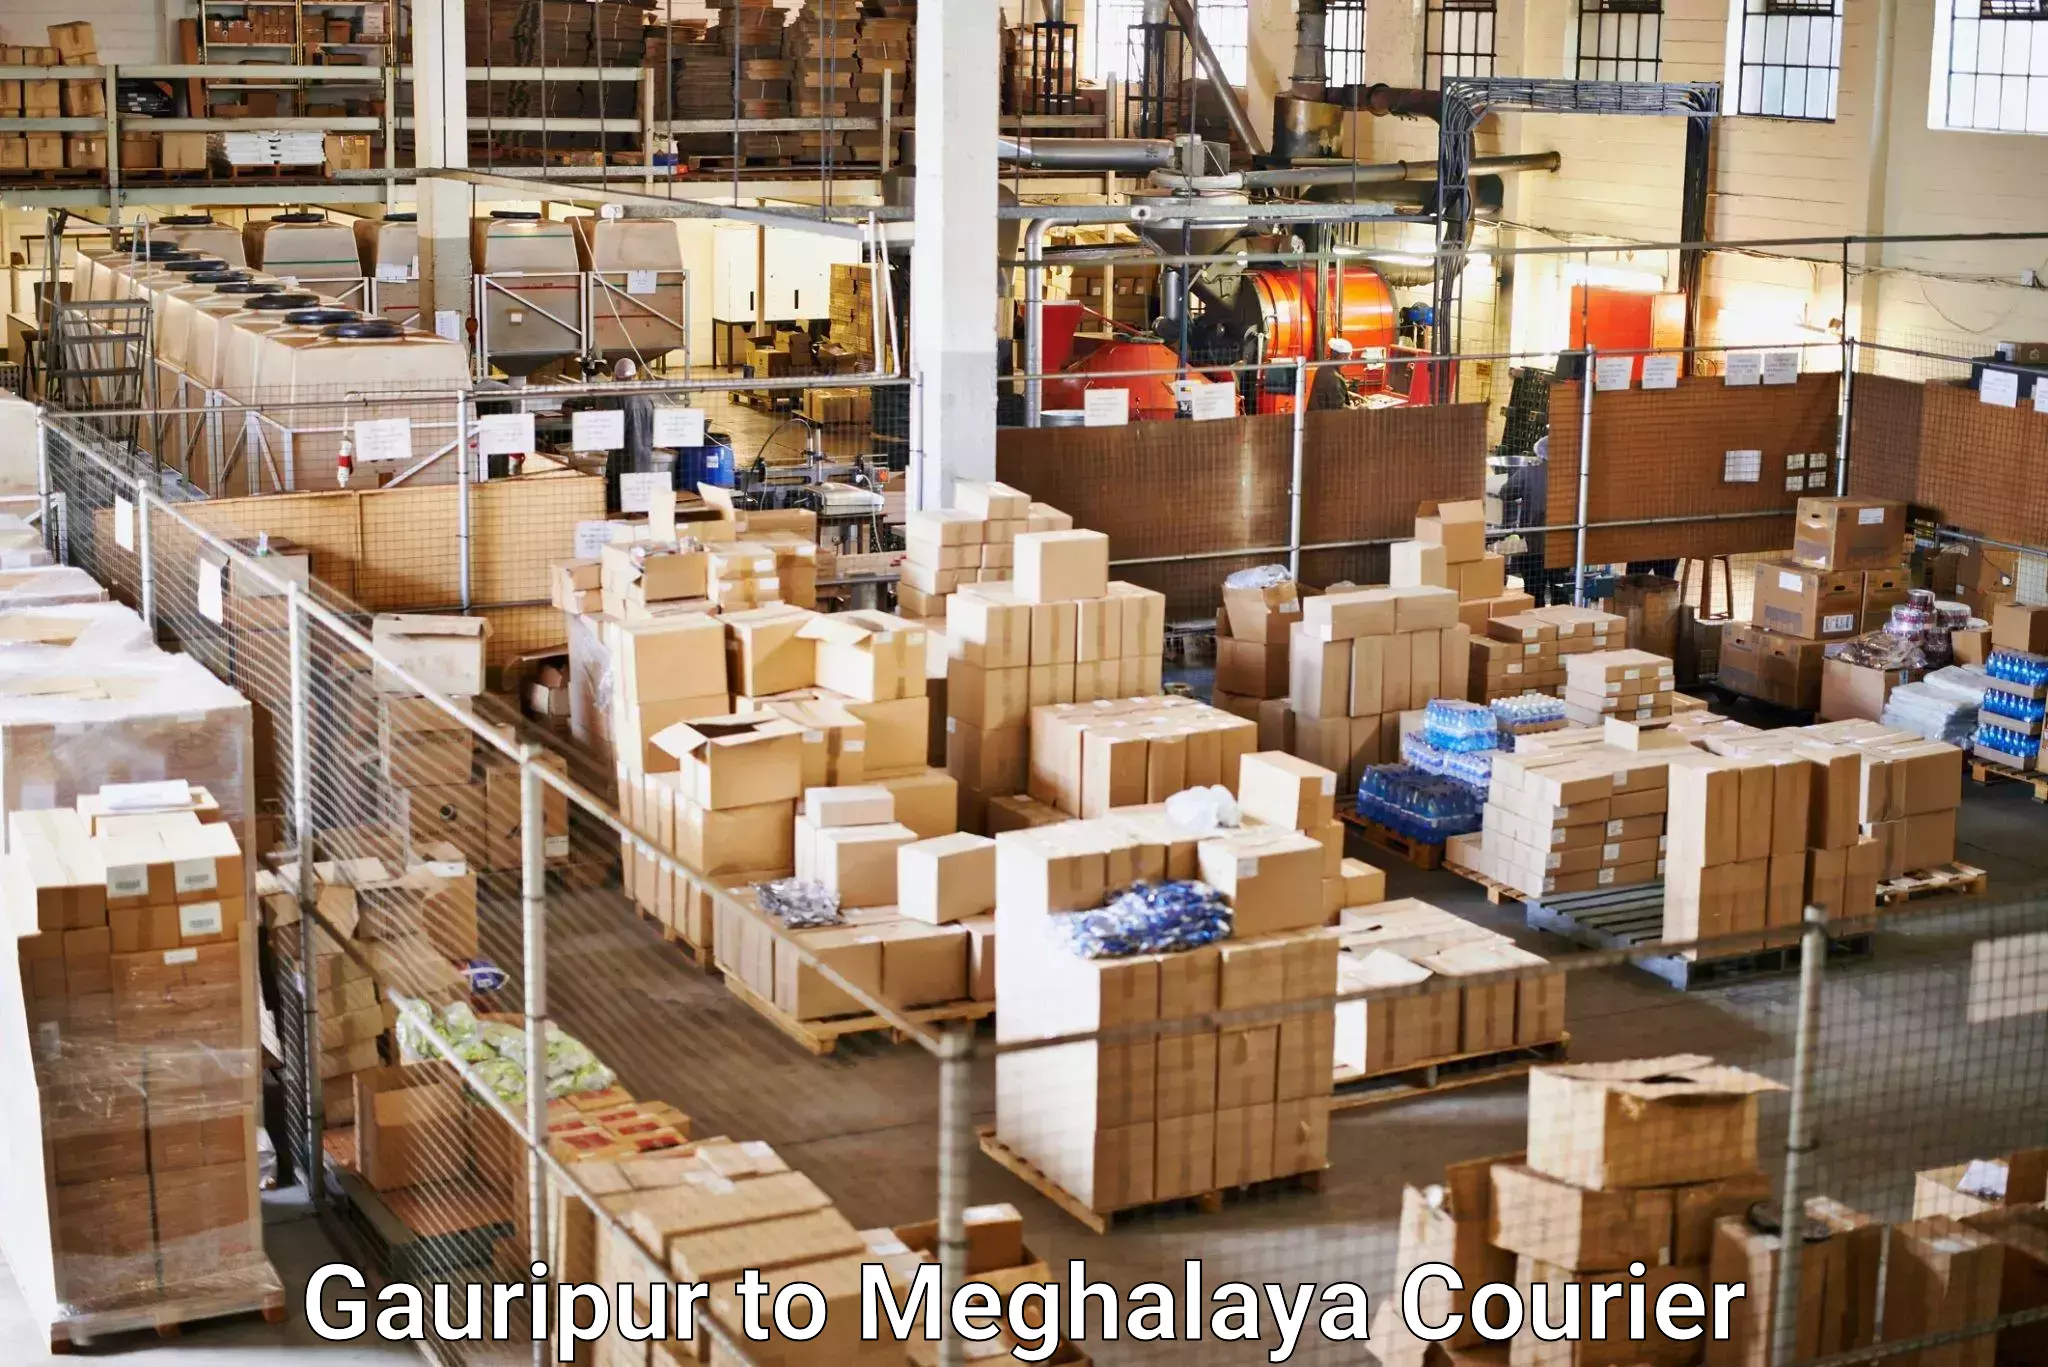 Express delivery capabilities Gauripur to Meghalaya